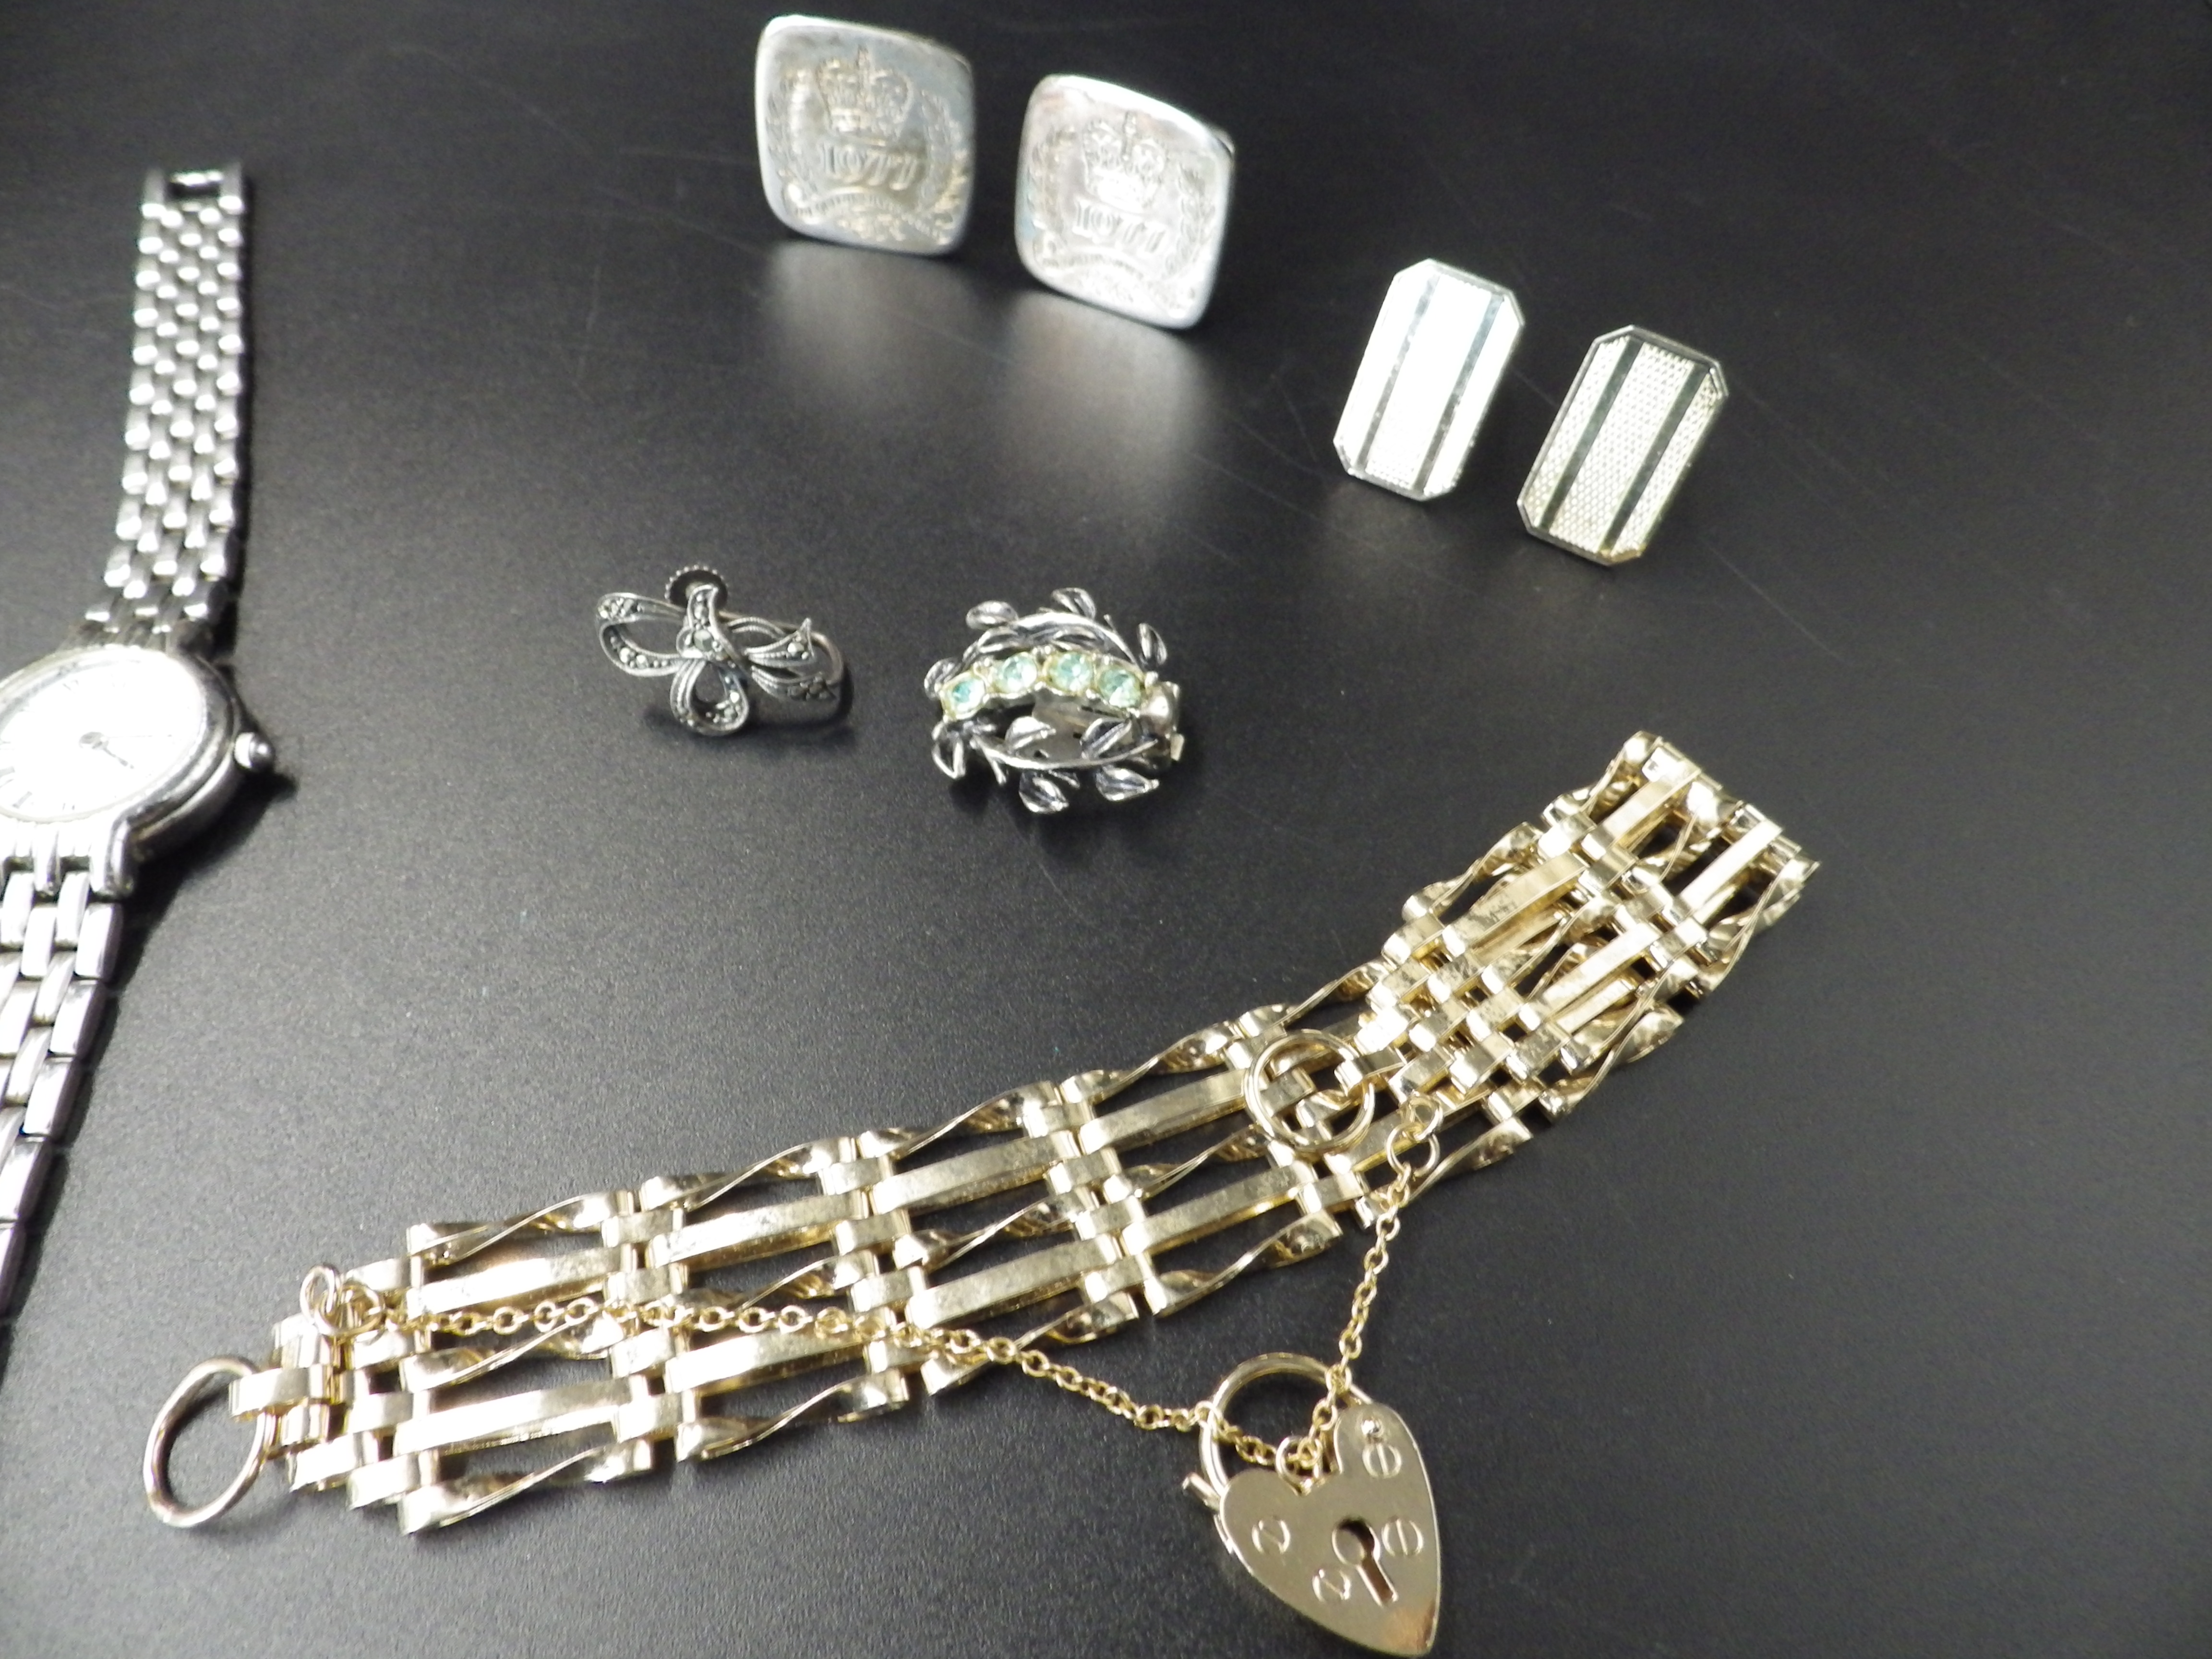 Costume jewellery lot to include 3 ladies watches - Accurist, Rotary and Avia, a bracelet, marcasite - Image 3 of 5